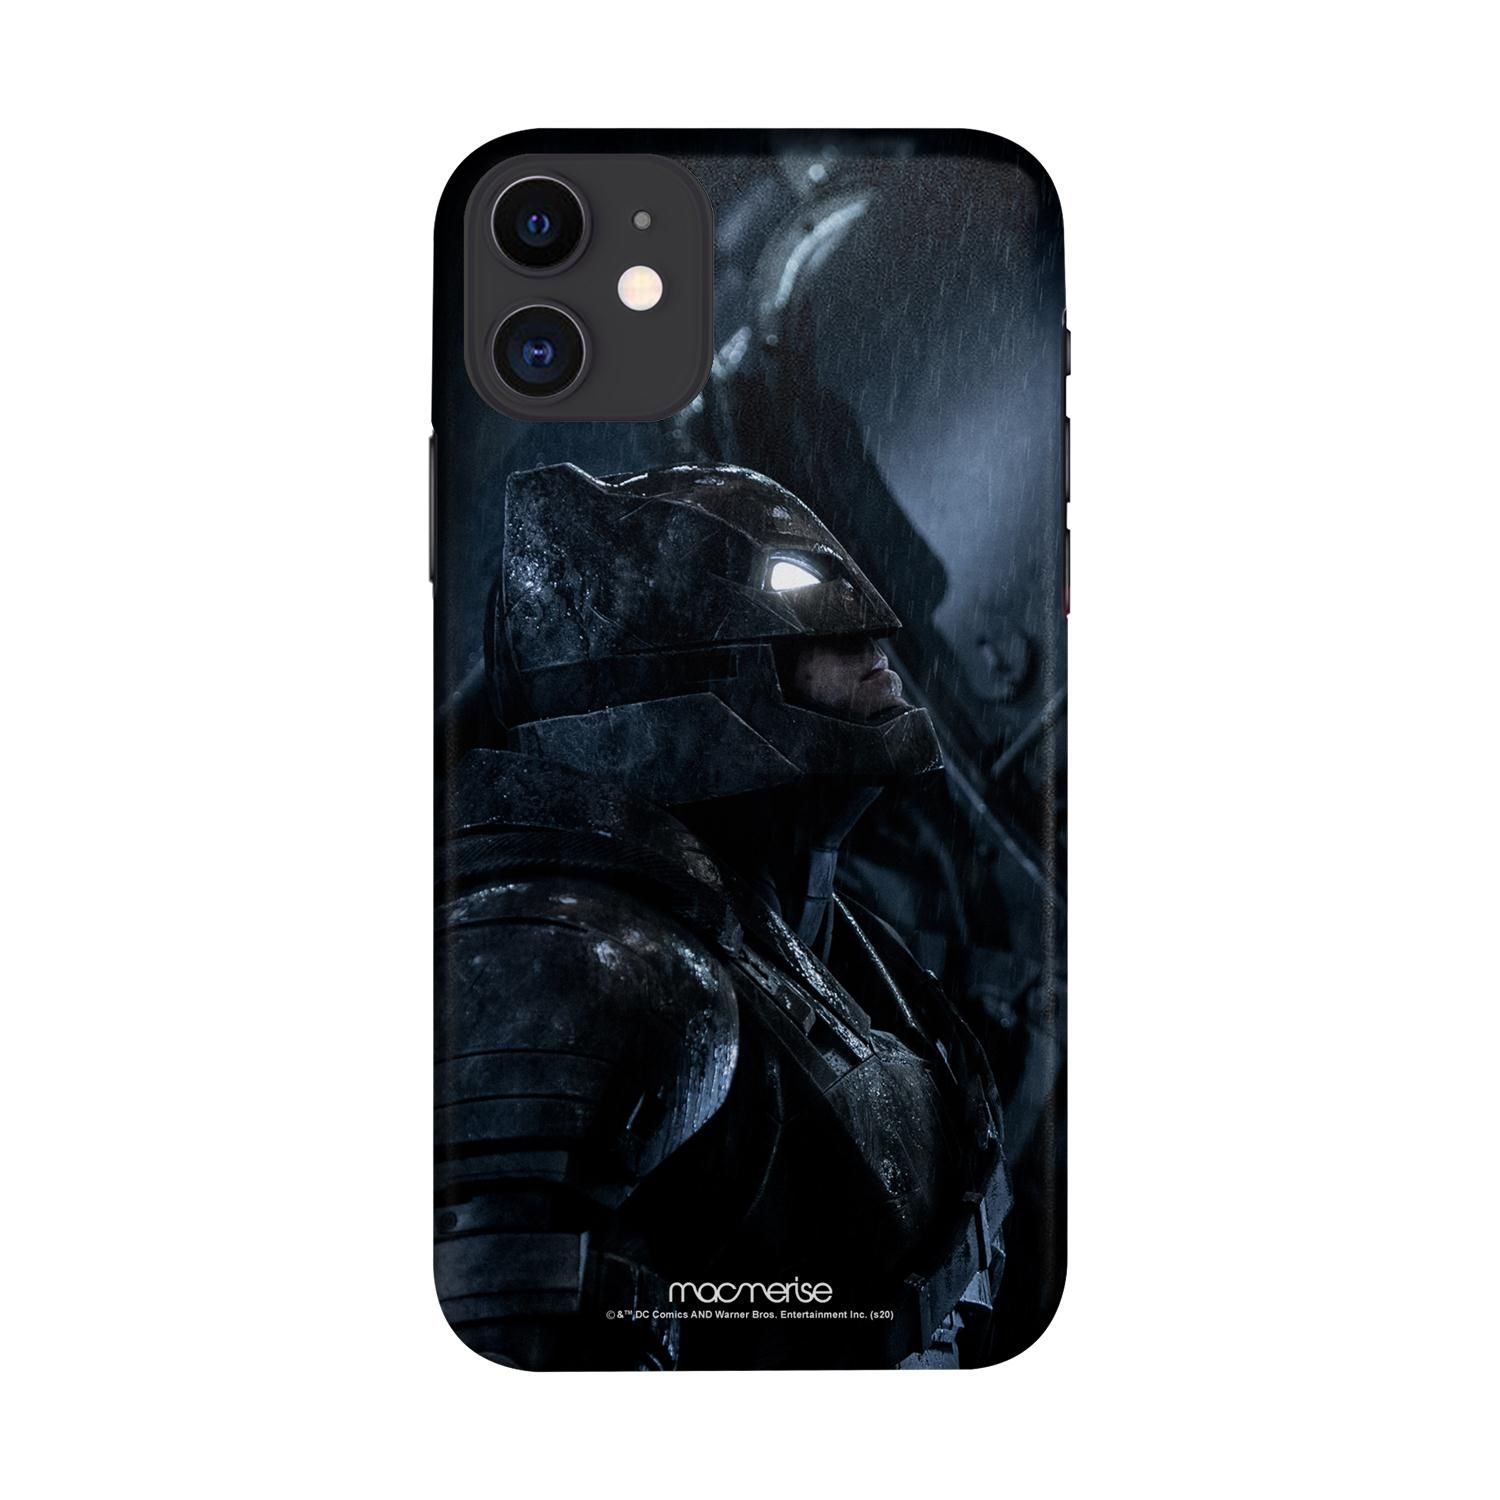 Buy The Victory Glance - Sleek Phone Case for iPhone 11 Online